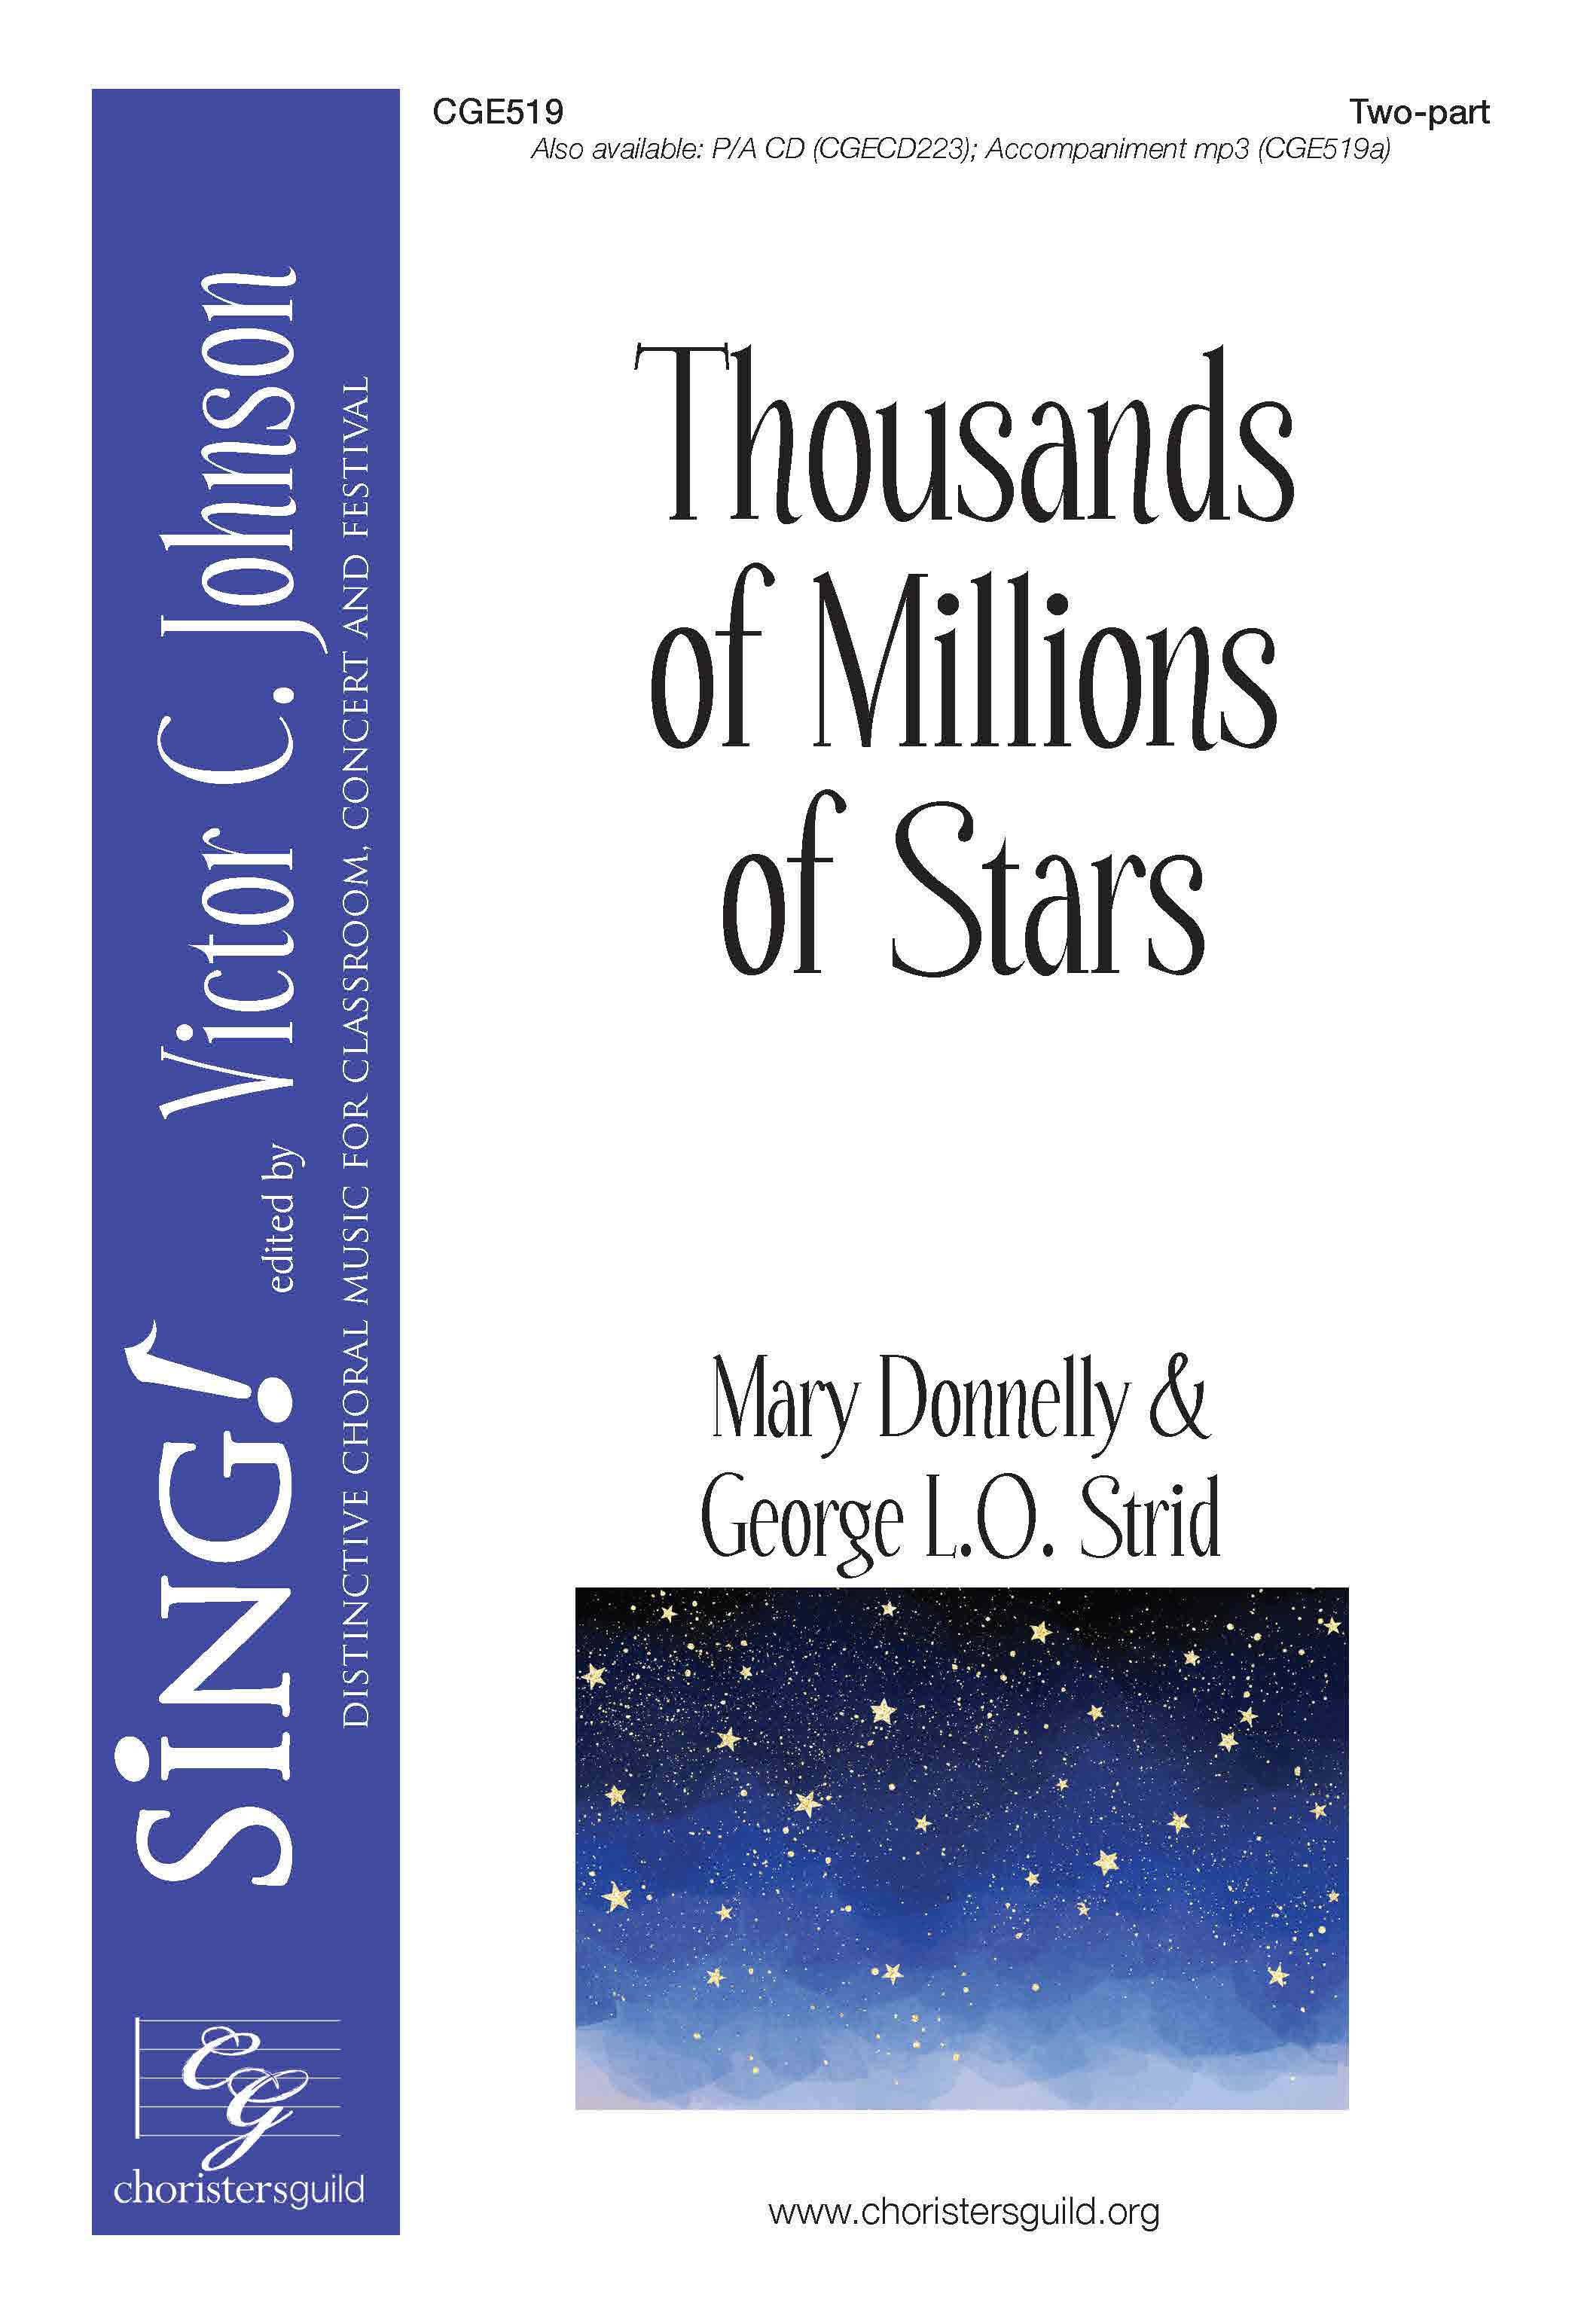 Thousands of Millions of Stars - Two-part